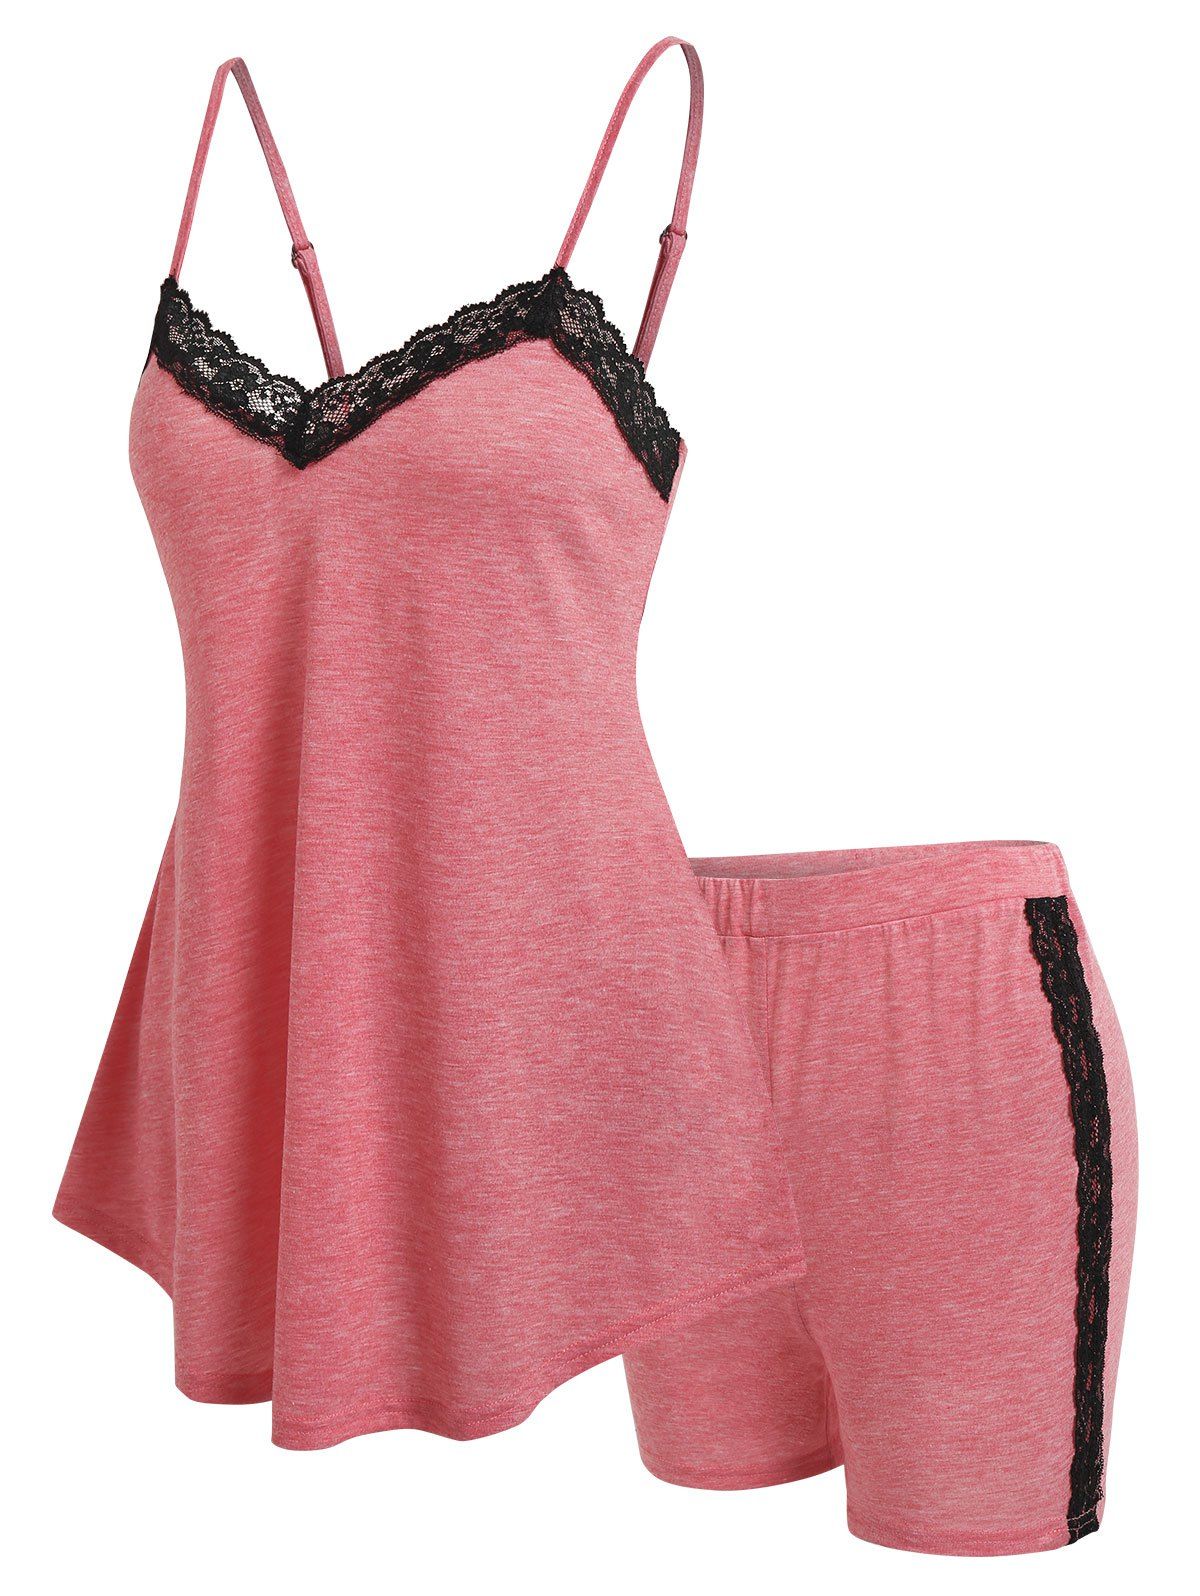 Lace Insert Cami Top and Shorts Lounge Set - LIGHT PINK M